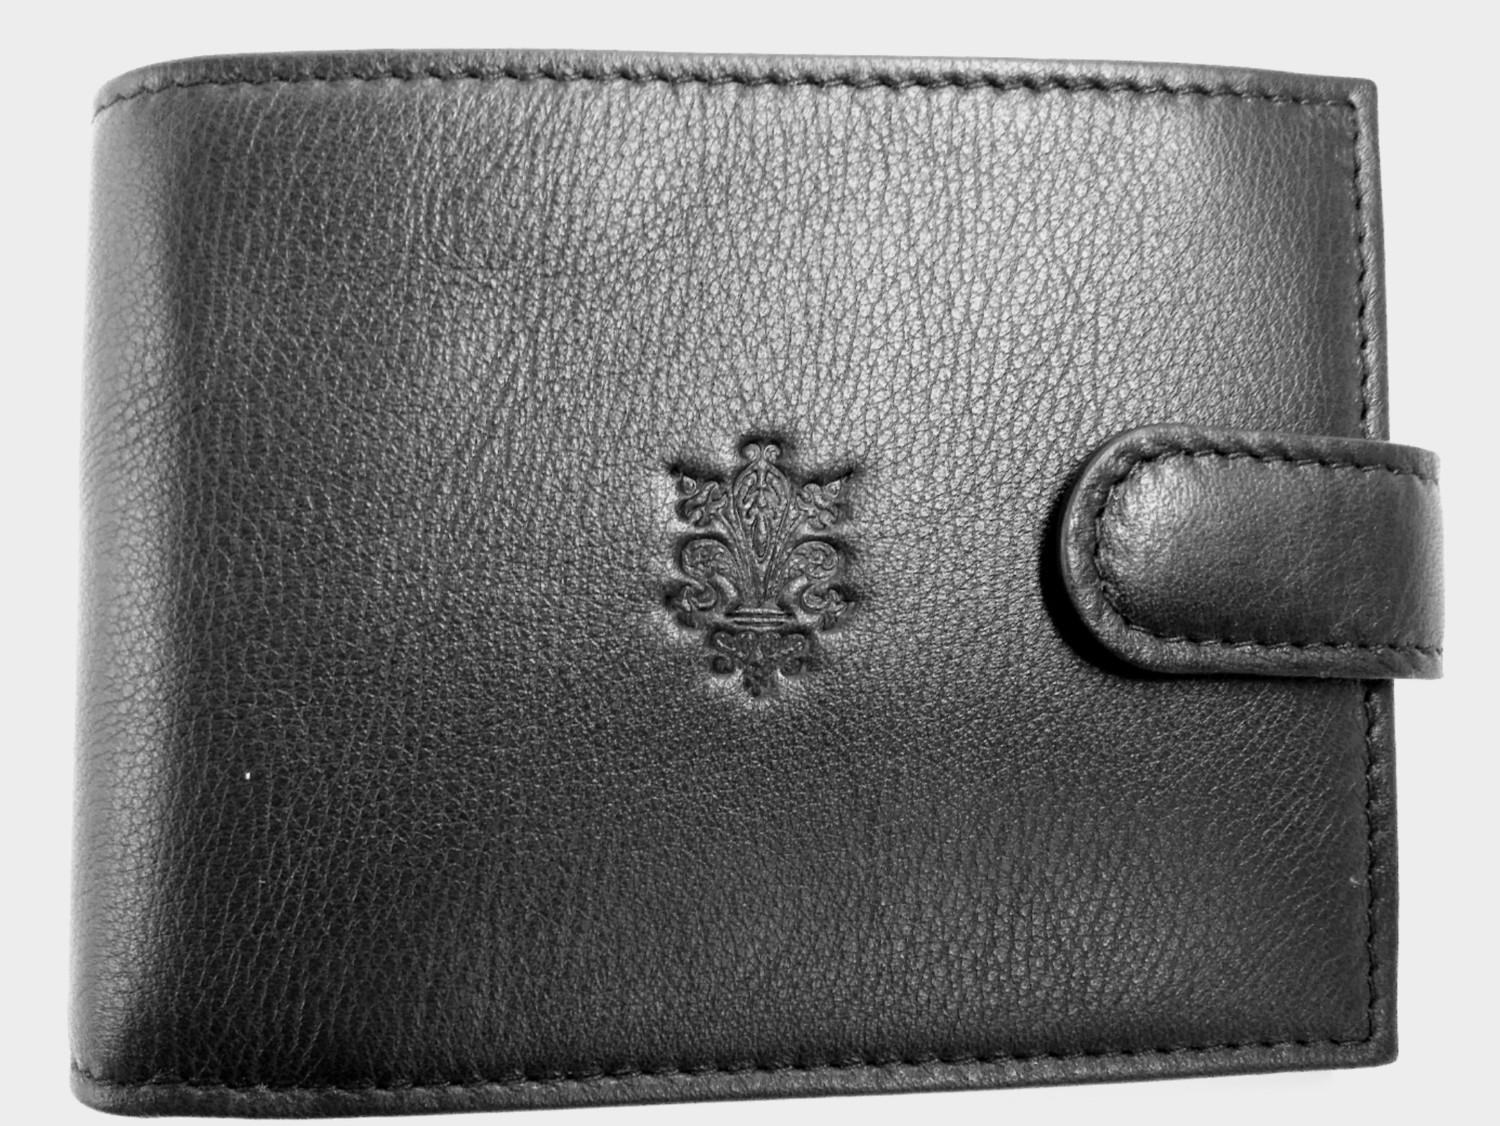 Tuscany leather wallet